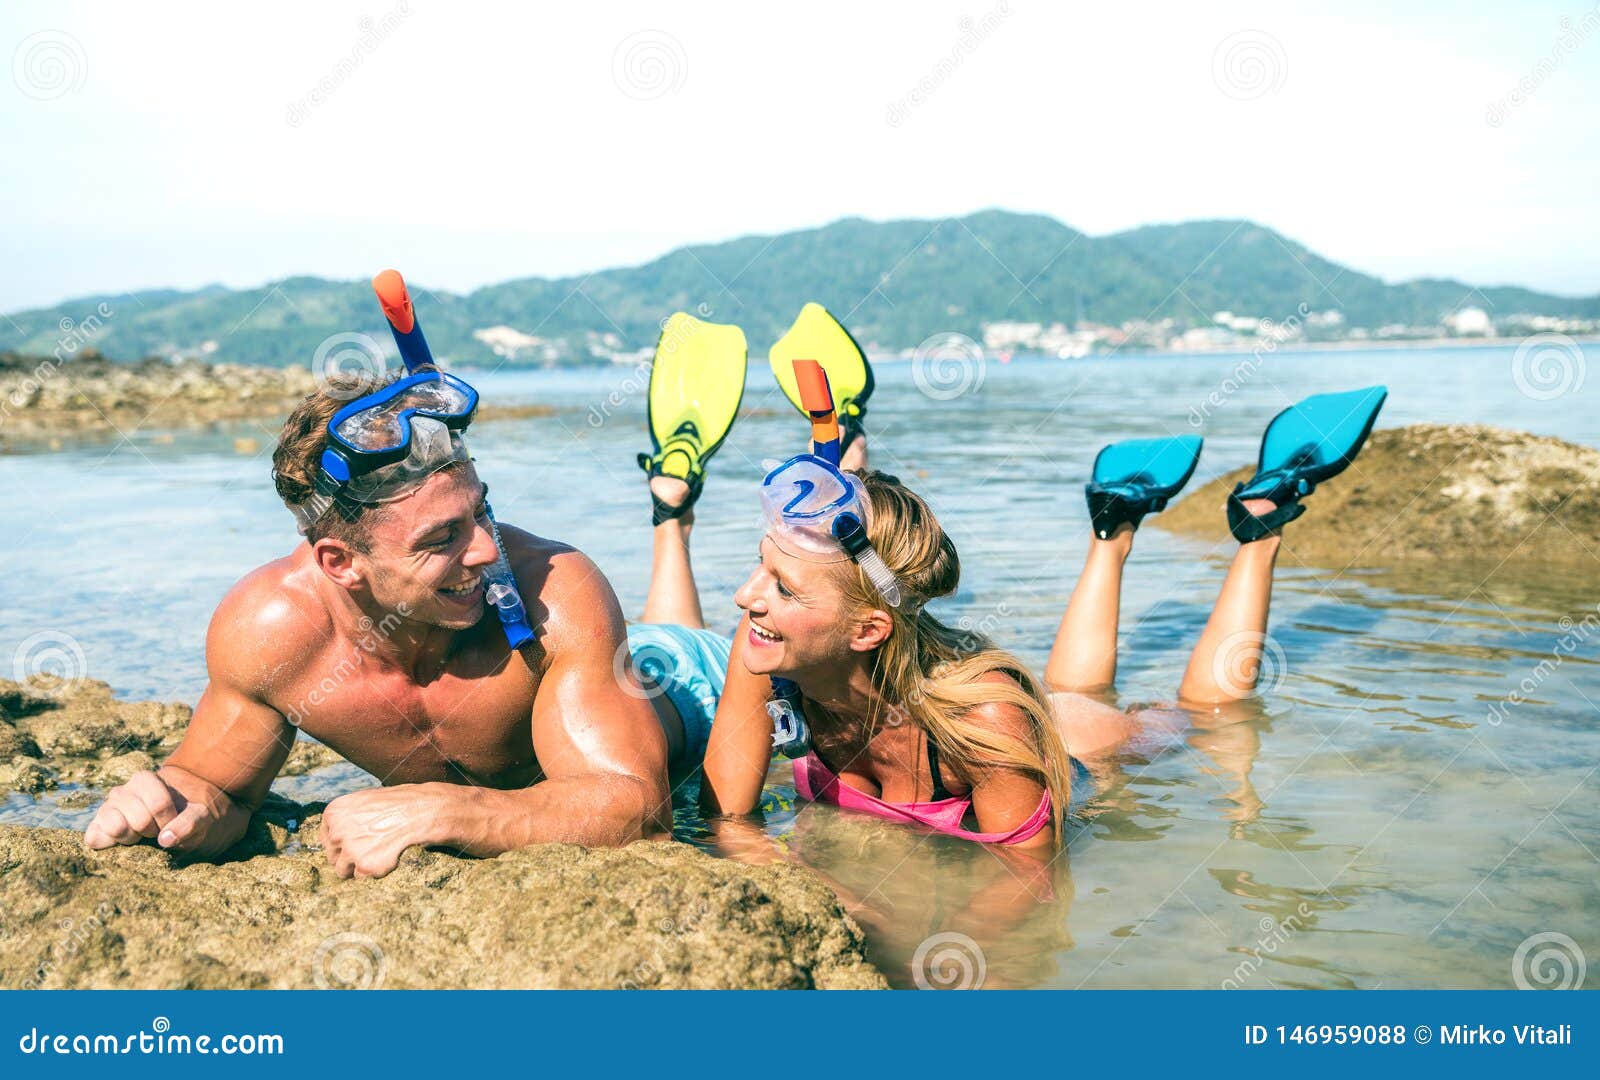 happy couple of vacationer in love having fun at water on tropical beach in thailand with snorkel mask and fins - active youth